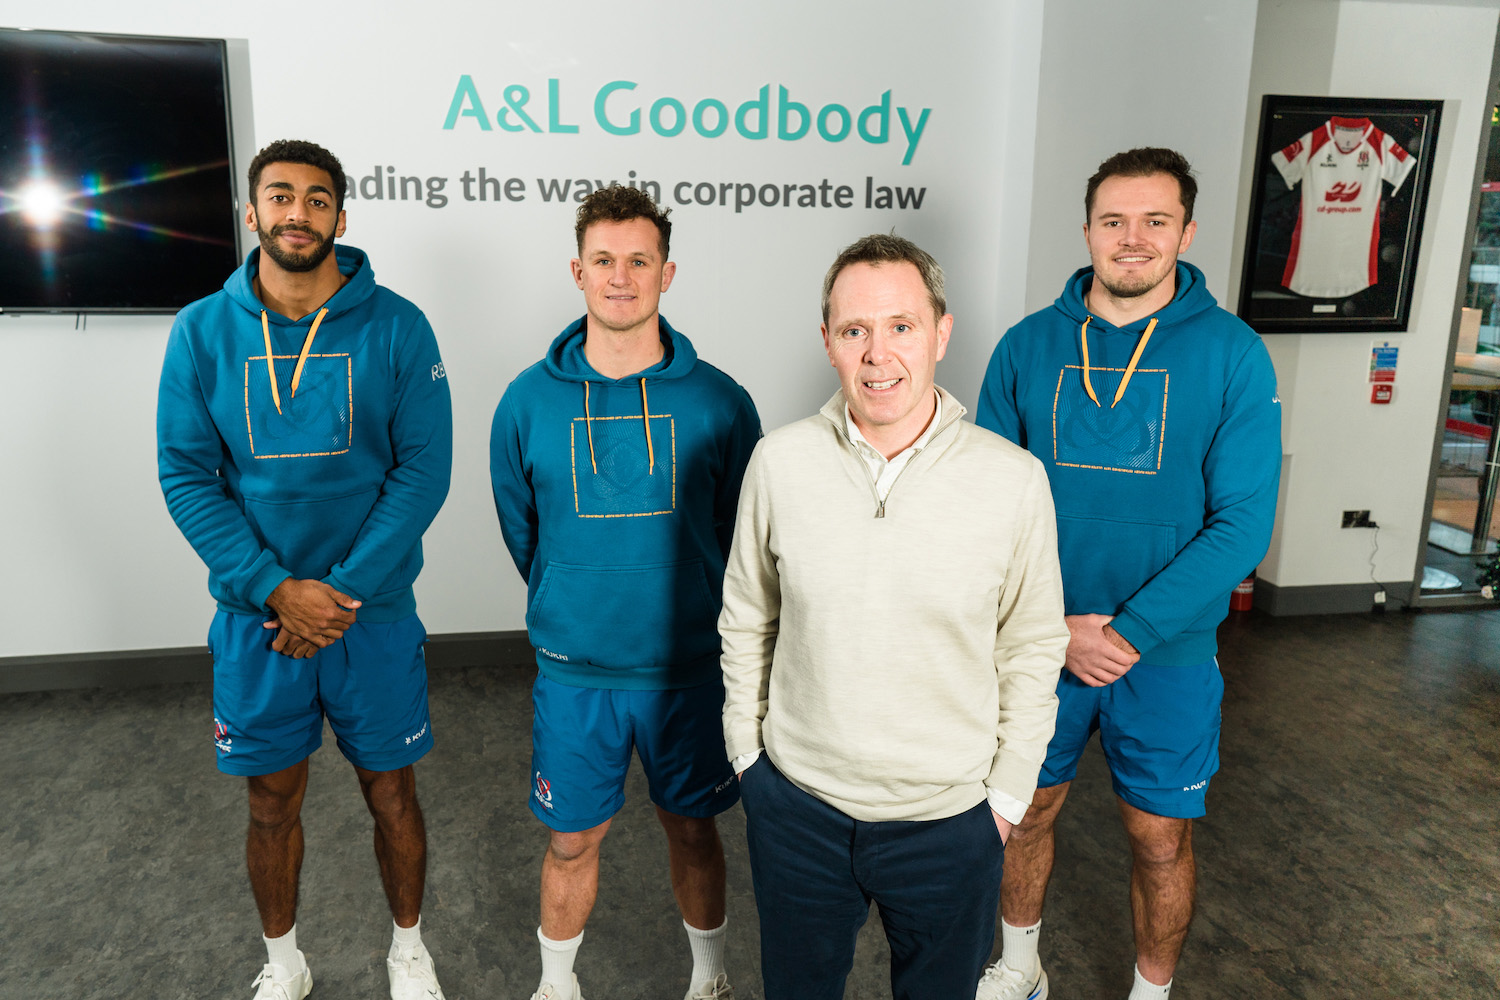 A&L Goodbody renews partnership with Ulster Rugby